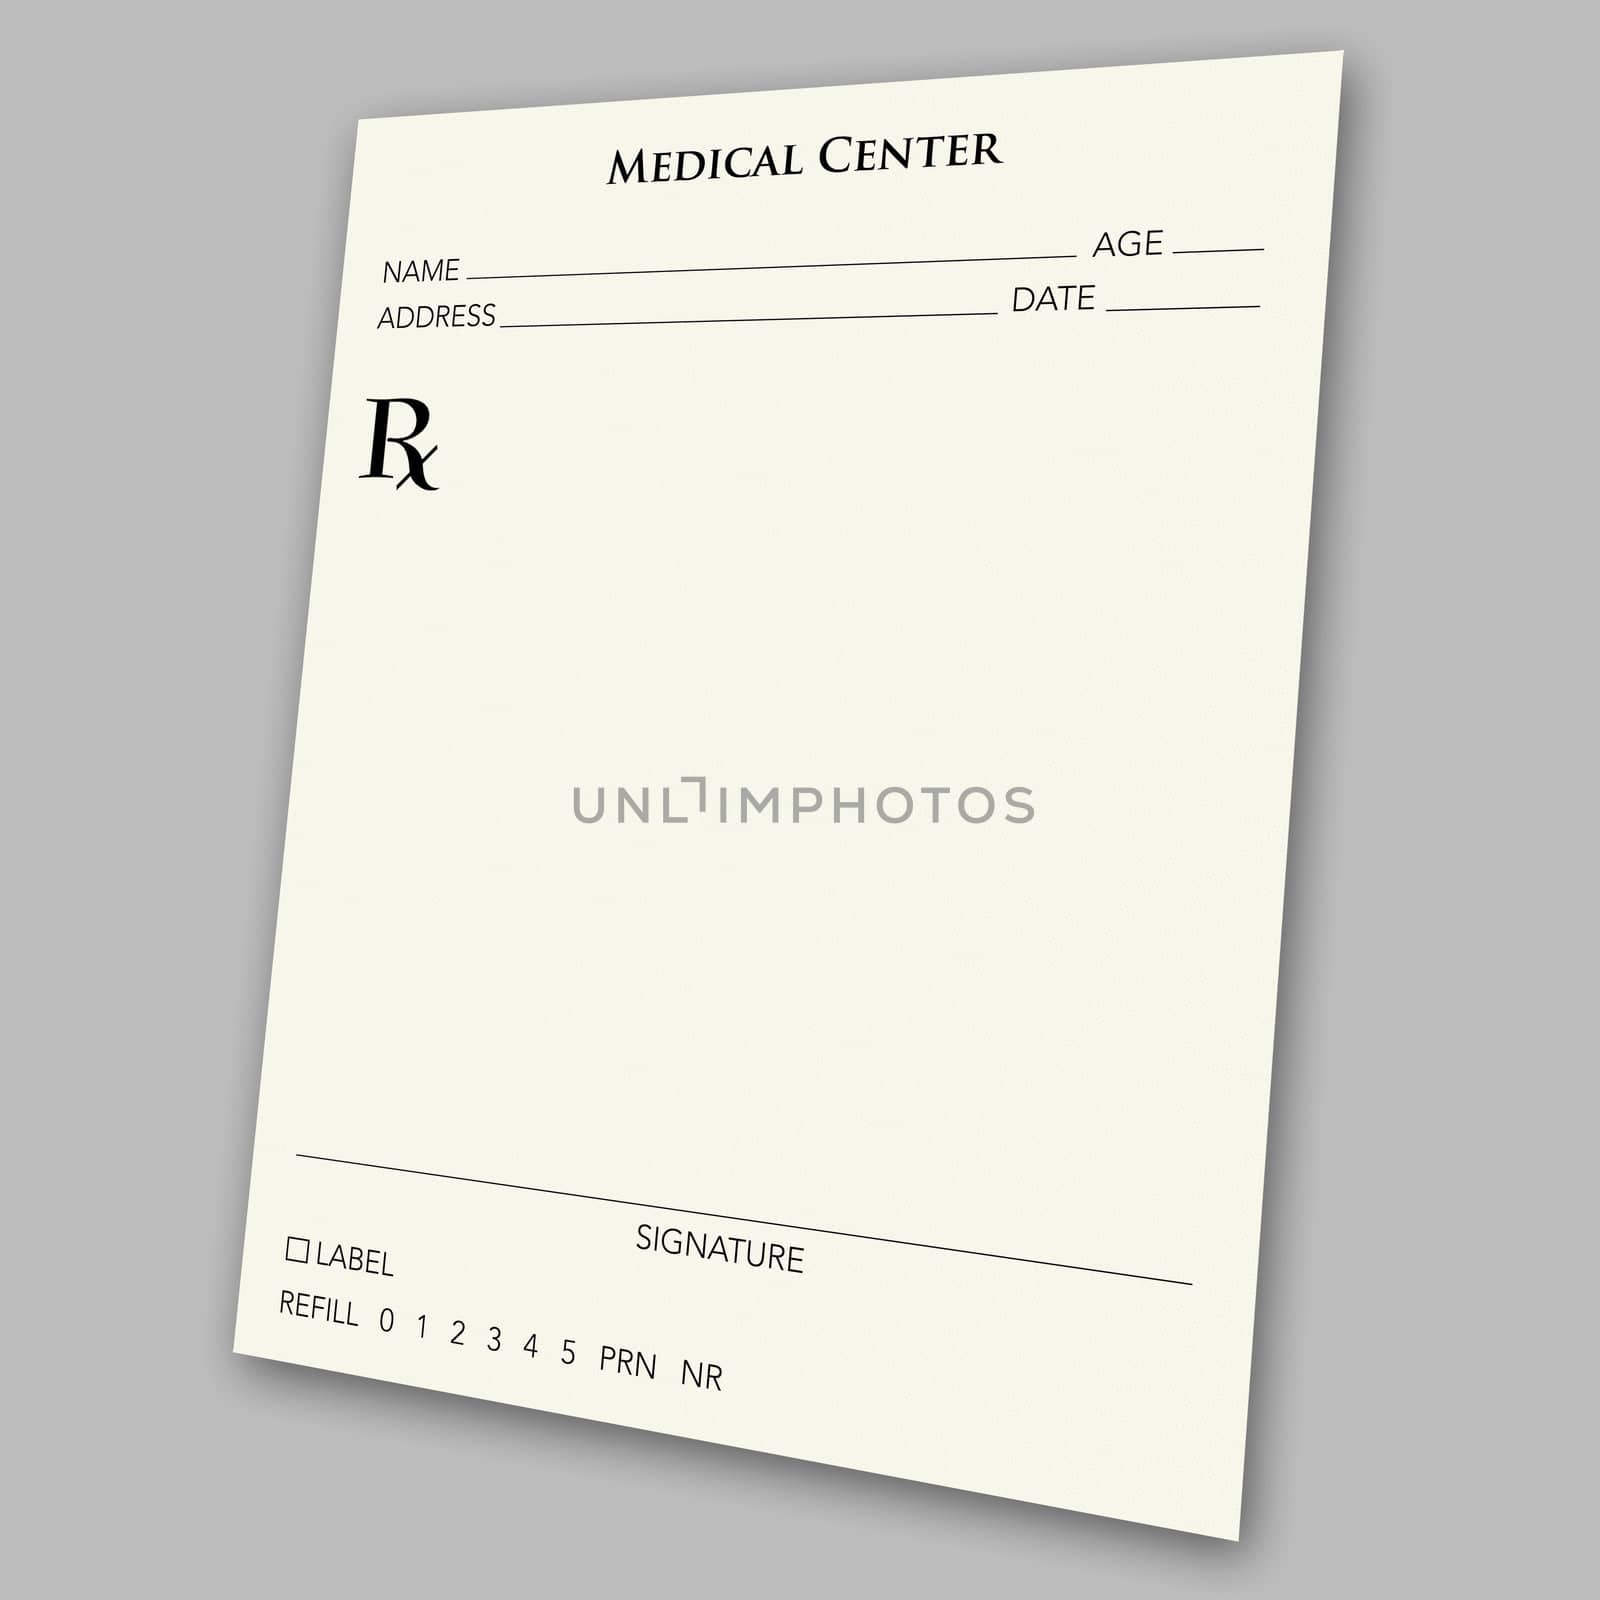 An empty prescription pad stationery - works great in medical-related ads.  Just insert whatever you want as the "prescription" with photoshop, and skew it to match the angle of the paper.